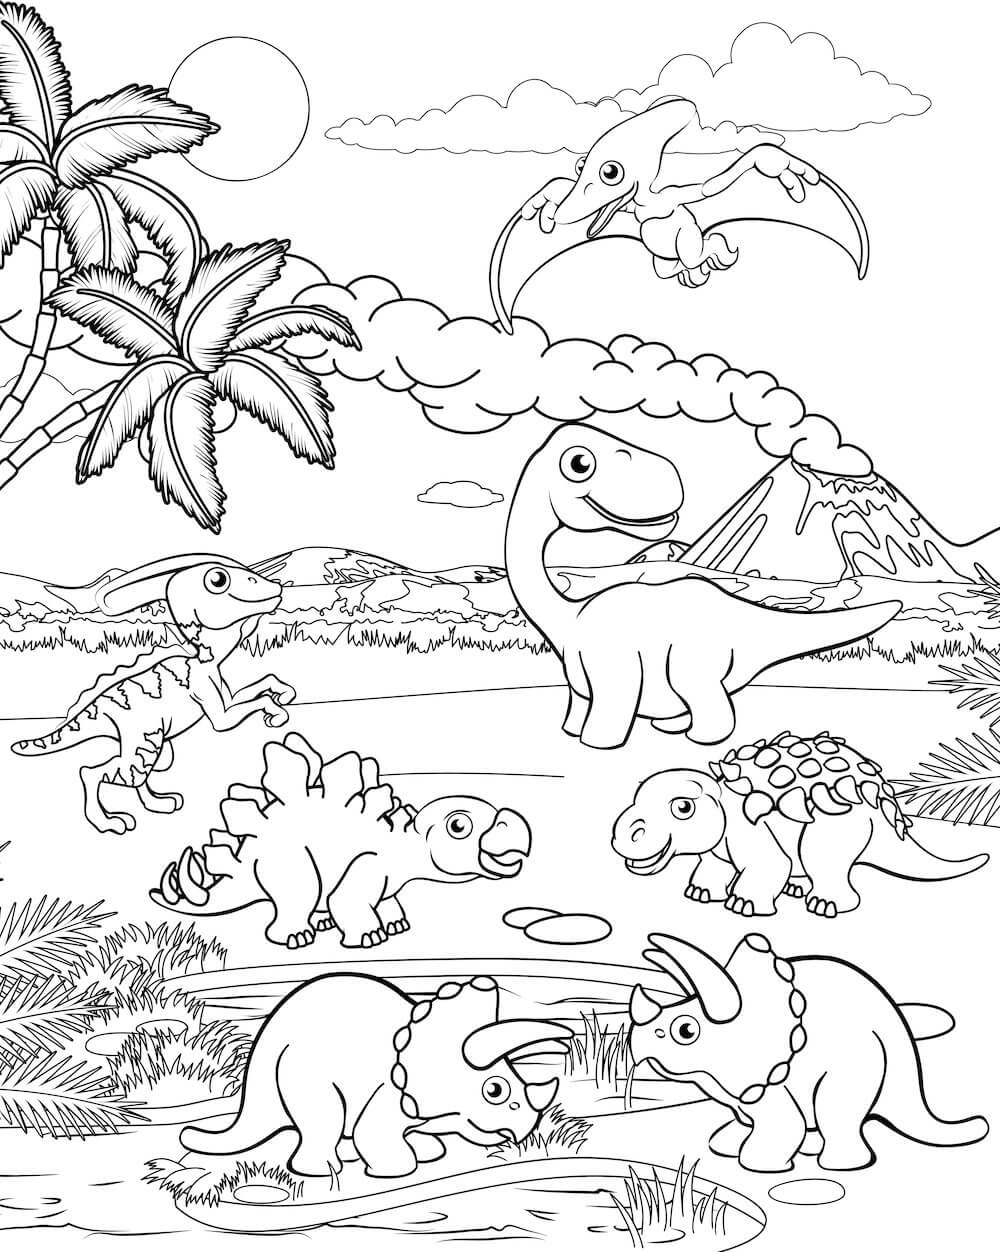 Dinosaures coloring page